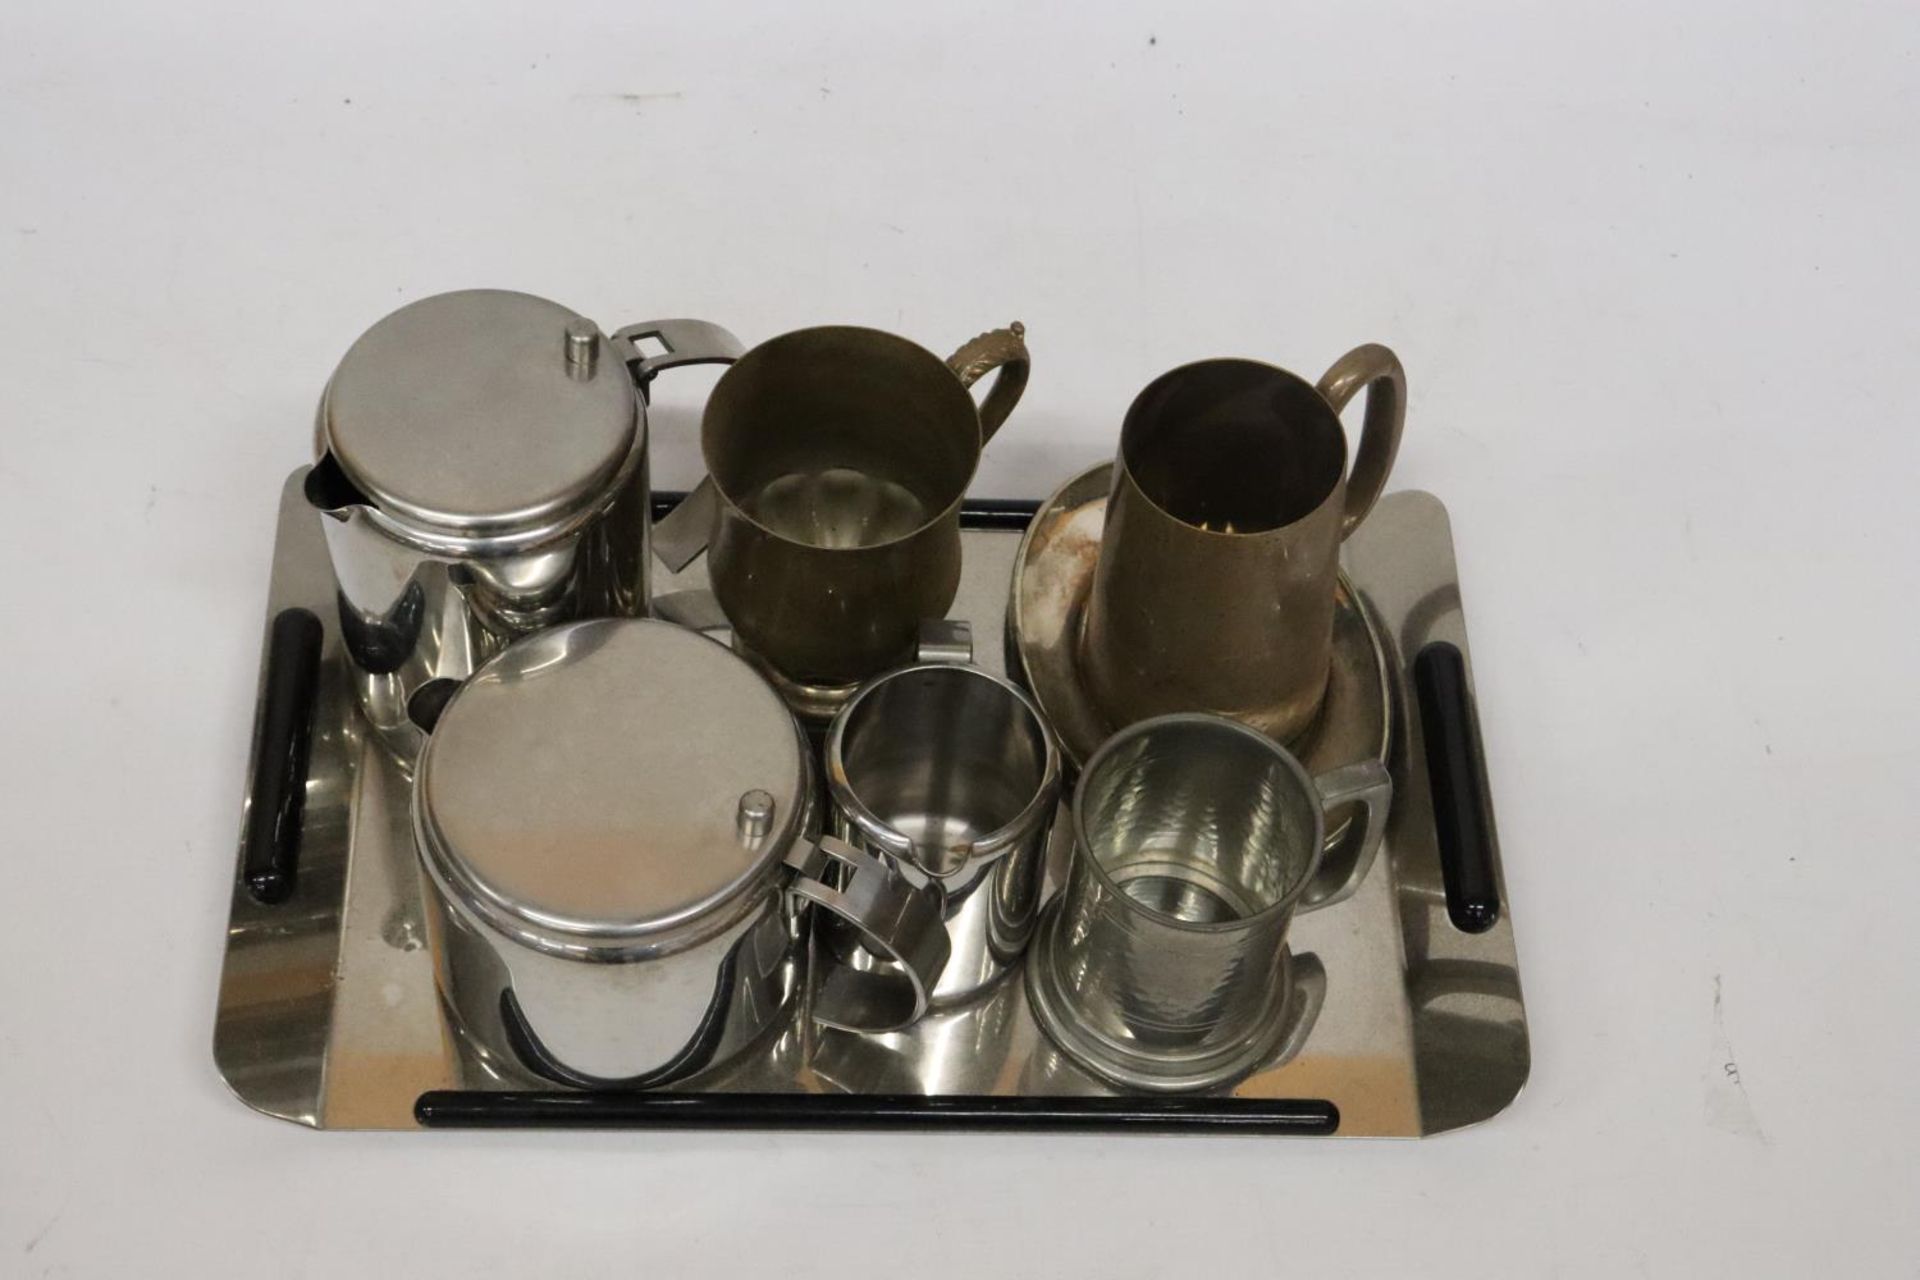 TWO BRASS TANKARDS, A PEWTER TANKARD, STAINLESS STEEL TEA POT, HOT WATER JUG AND CREAM JUG ON A TRAY - Image 2 of 5